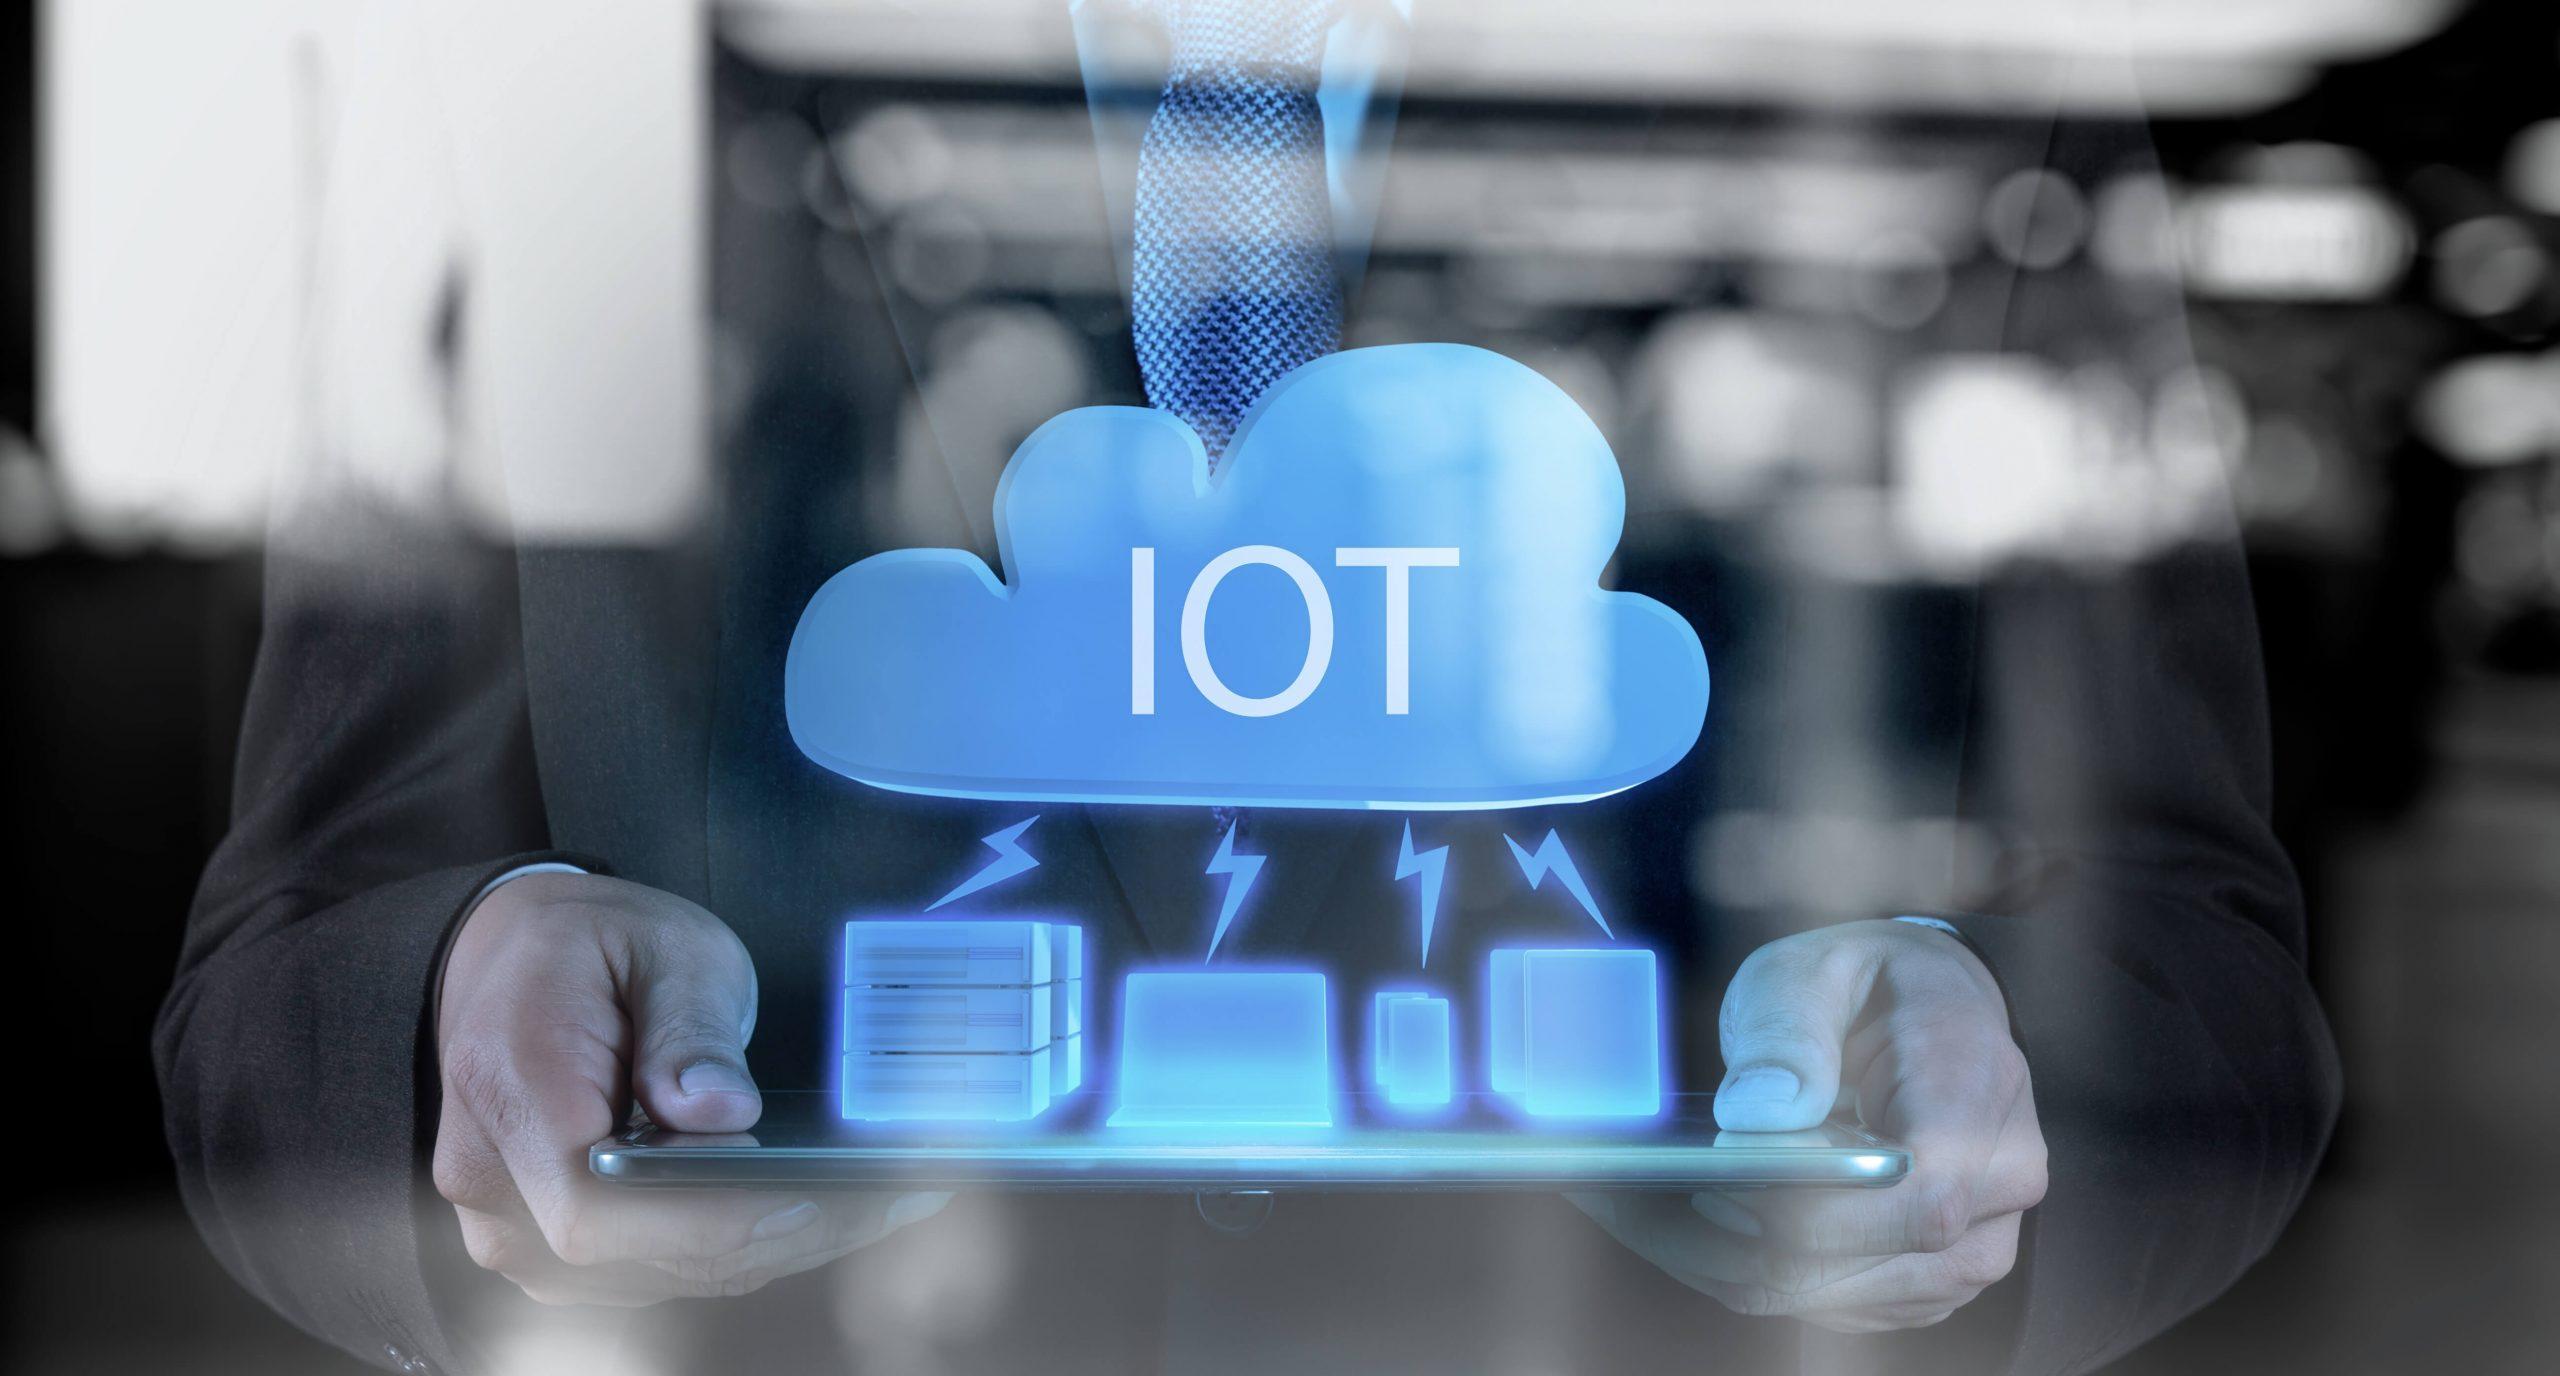 Internet of things services company